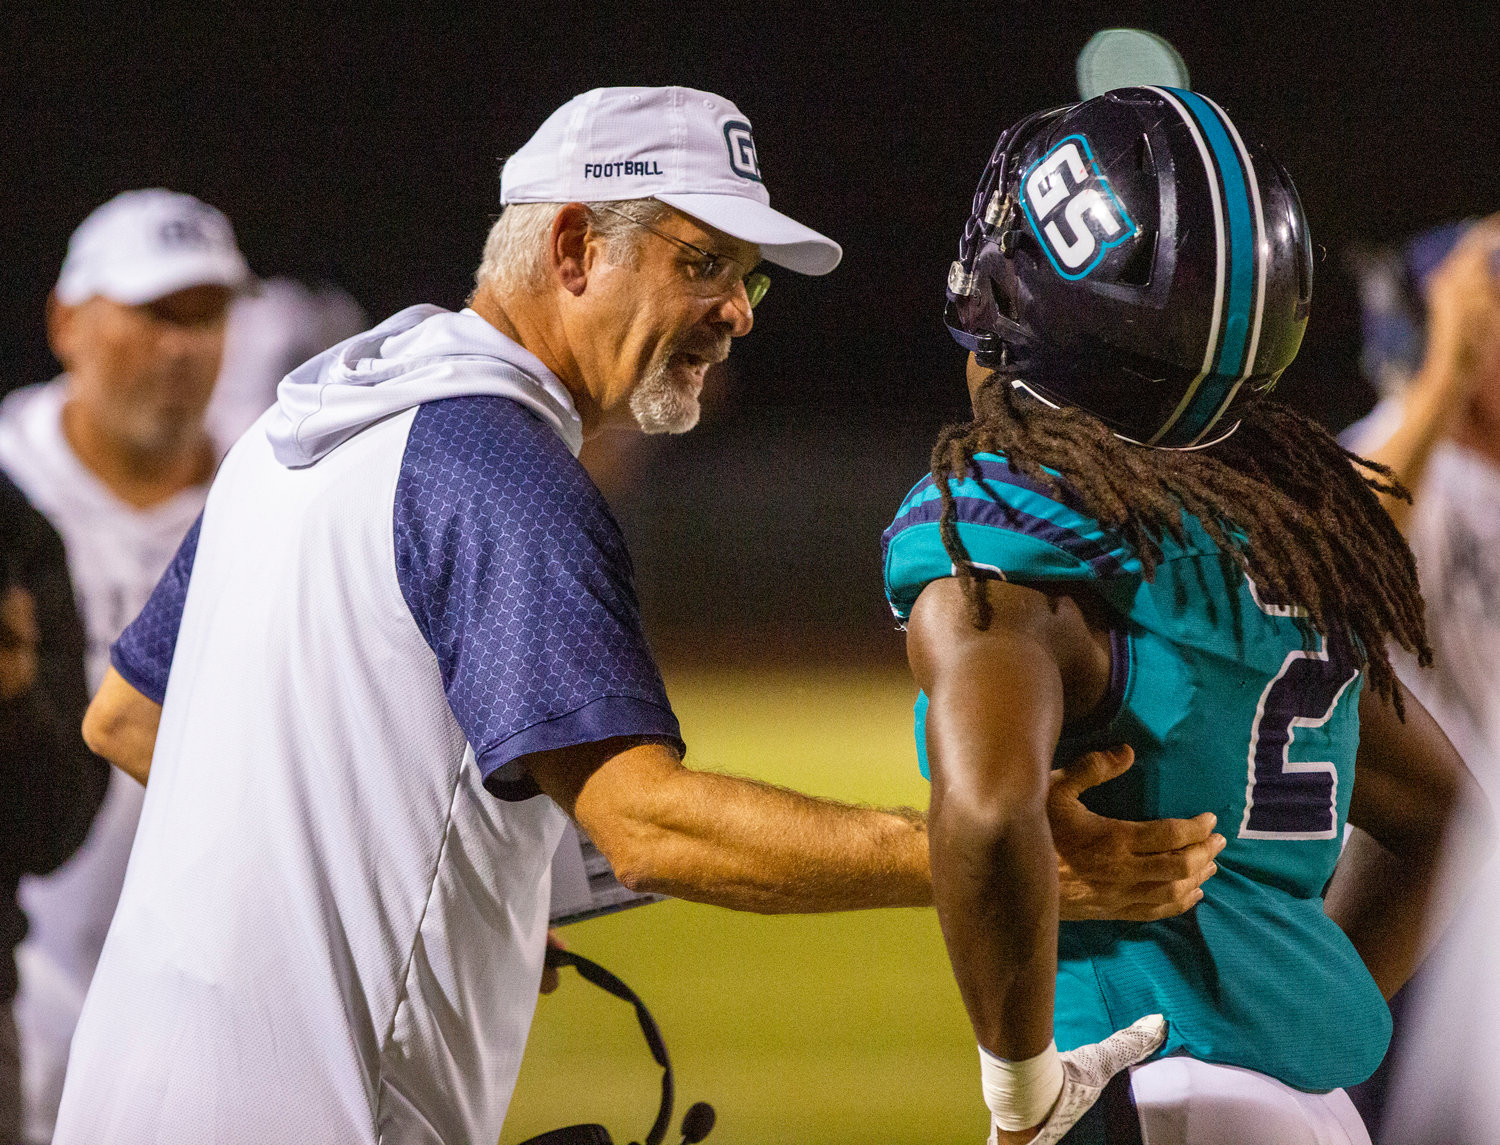 Gulf Shores defensive coordinator Paul Rhoads converses with junior Ronnie Royal after a play during the Dolphins’ Class 5A Region 1 contest against the Elberta Warriors at home Oct. 6. Gulf Shores can improve upon its best start in program history with a road win over Vigor this week.